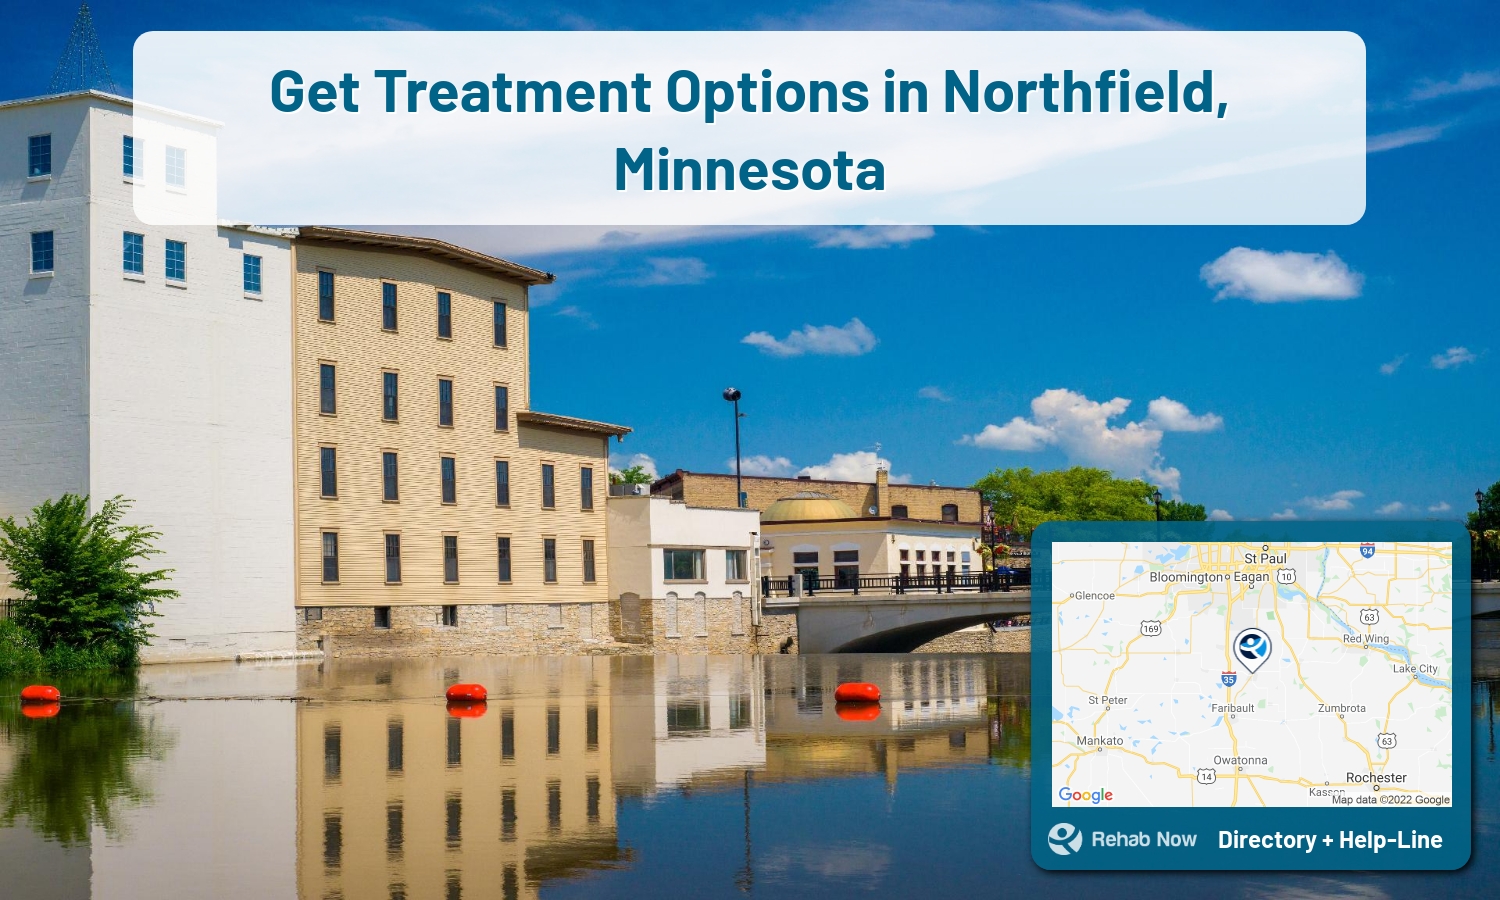 Northfield, MN Treatment Centers. Find drug rehab in Northfield, Minnesota, or detox and treatment programs. Get the right help now!